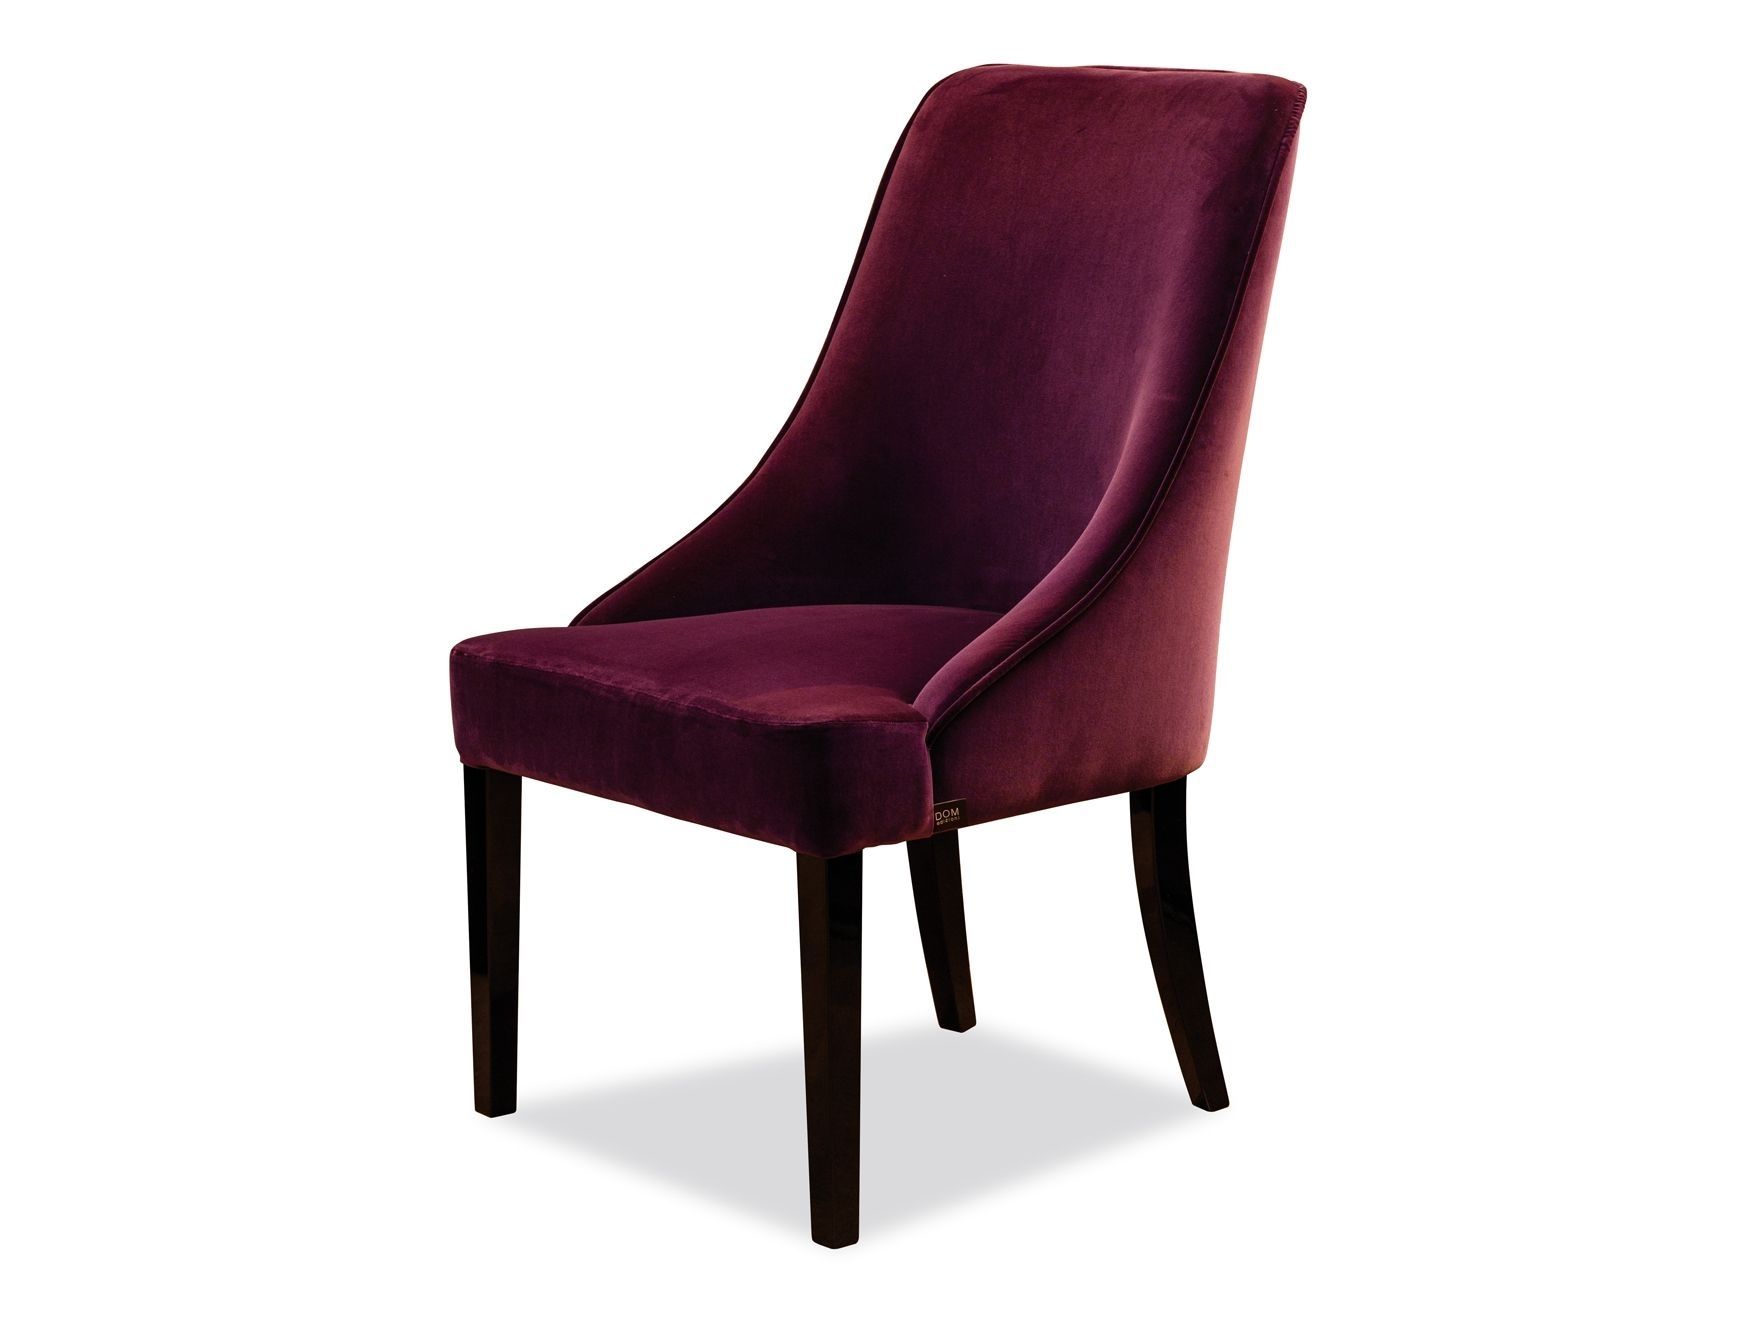 Famous Dom Side Chairs Intended For Grace Modern Italian Dining And Side Chair Shown In Burgundy Fabric (View 19 of 20)